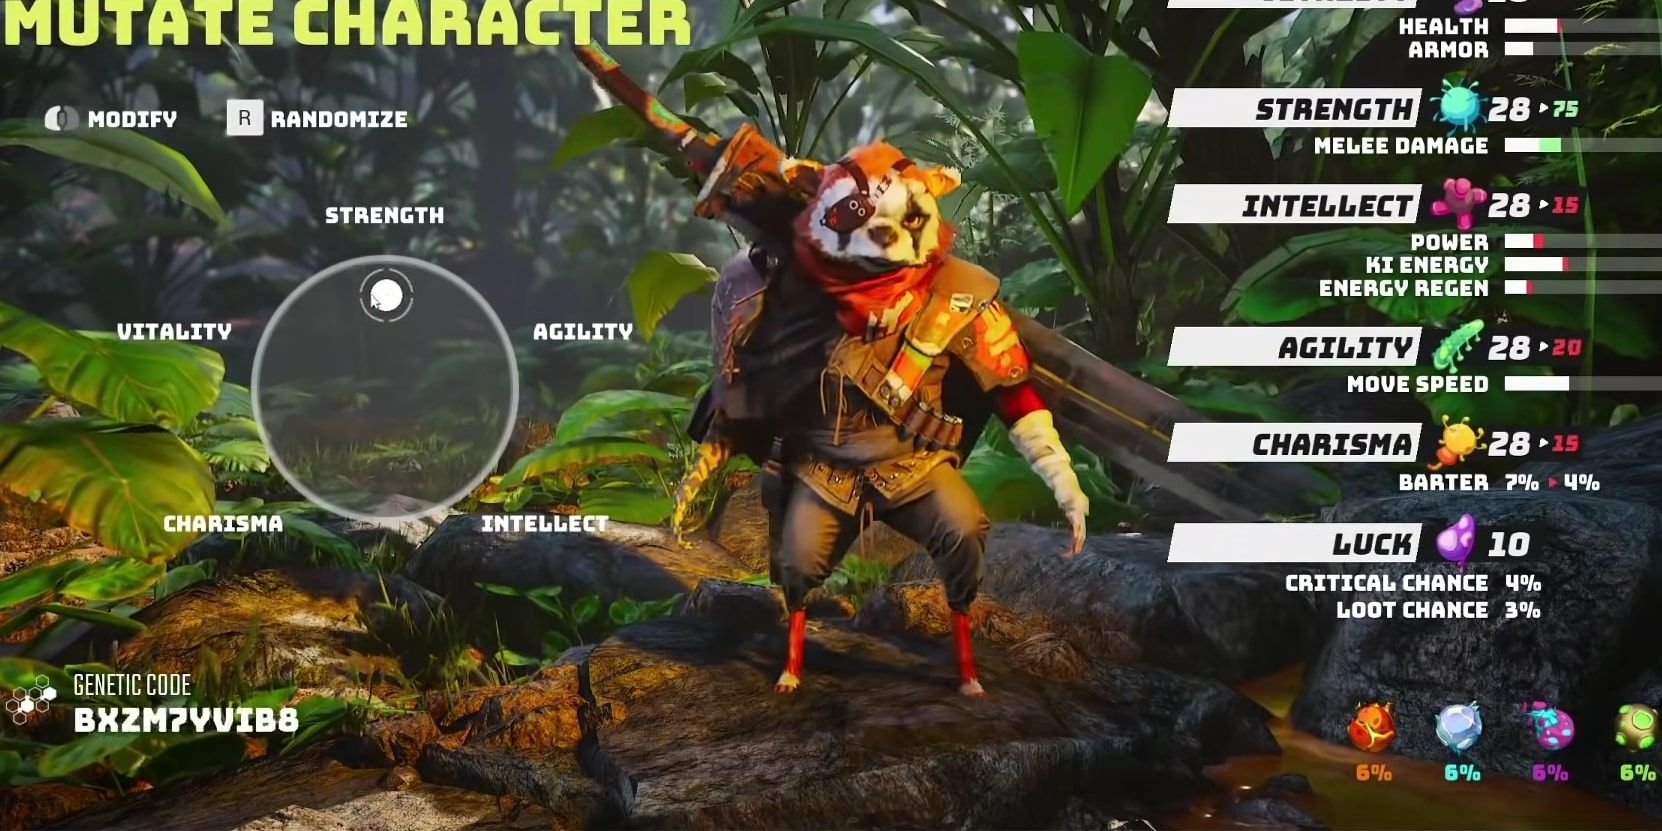 The Biomutant character awaiting a mutation customization with all the specific stats visible off to the side.